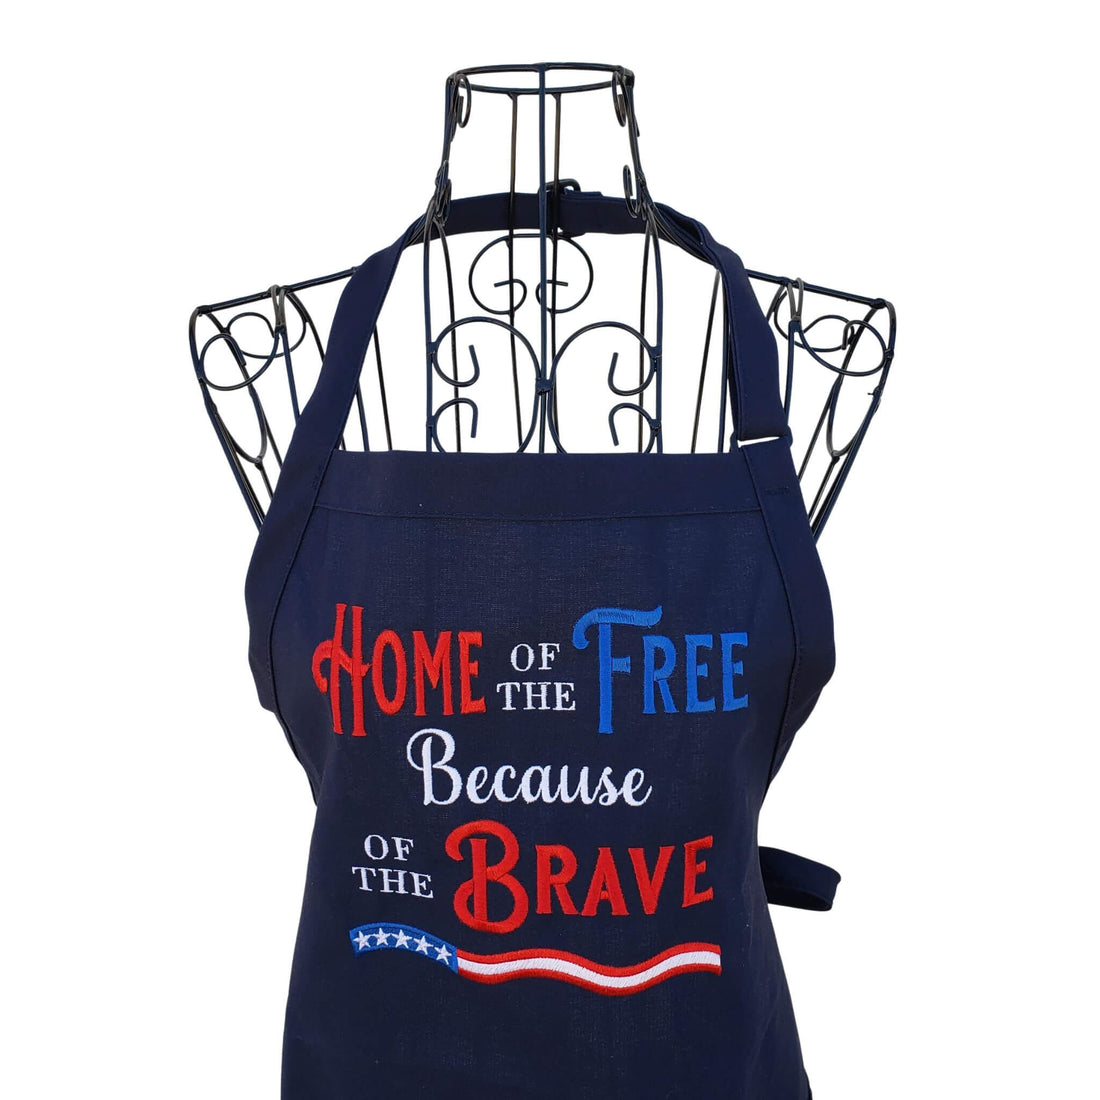 Home of the Free Because of the Brave Patriotic embroidered adjustable bib apron with pockets. - Life Has Just Begun